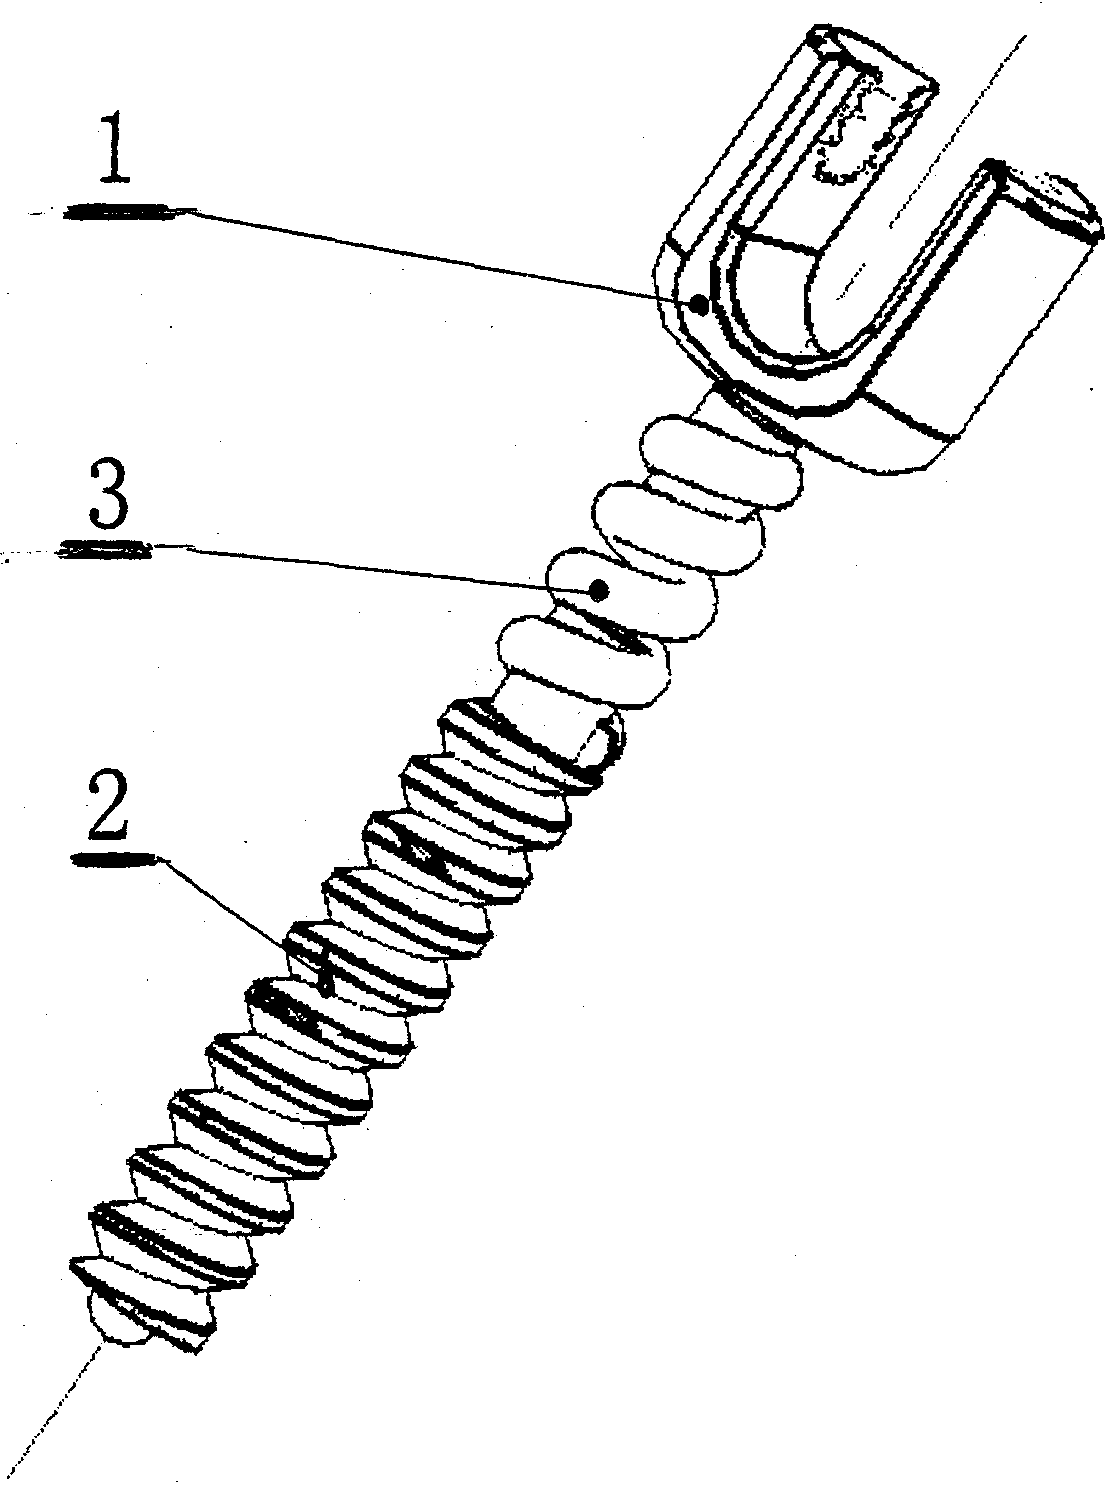 Pedicle screw with axial buffer and micro-dynamic functions